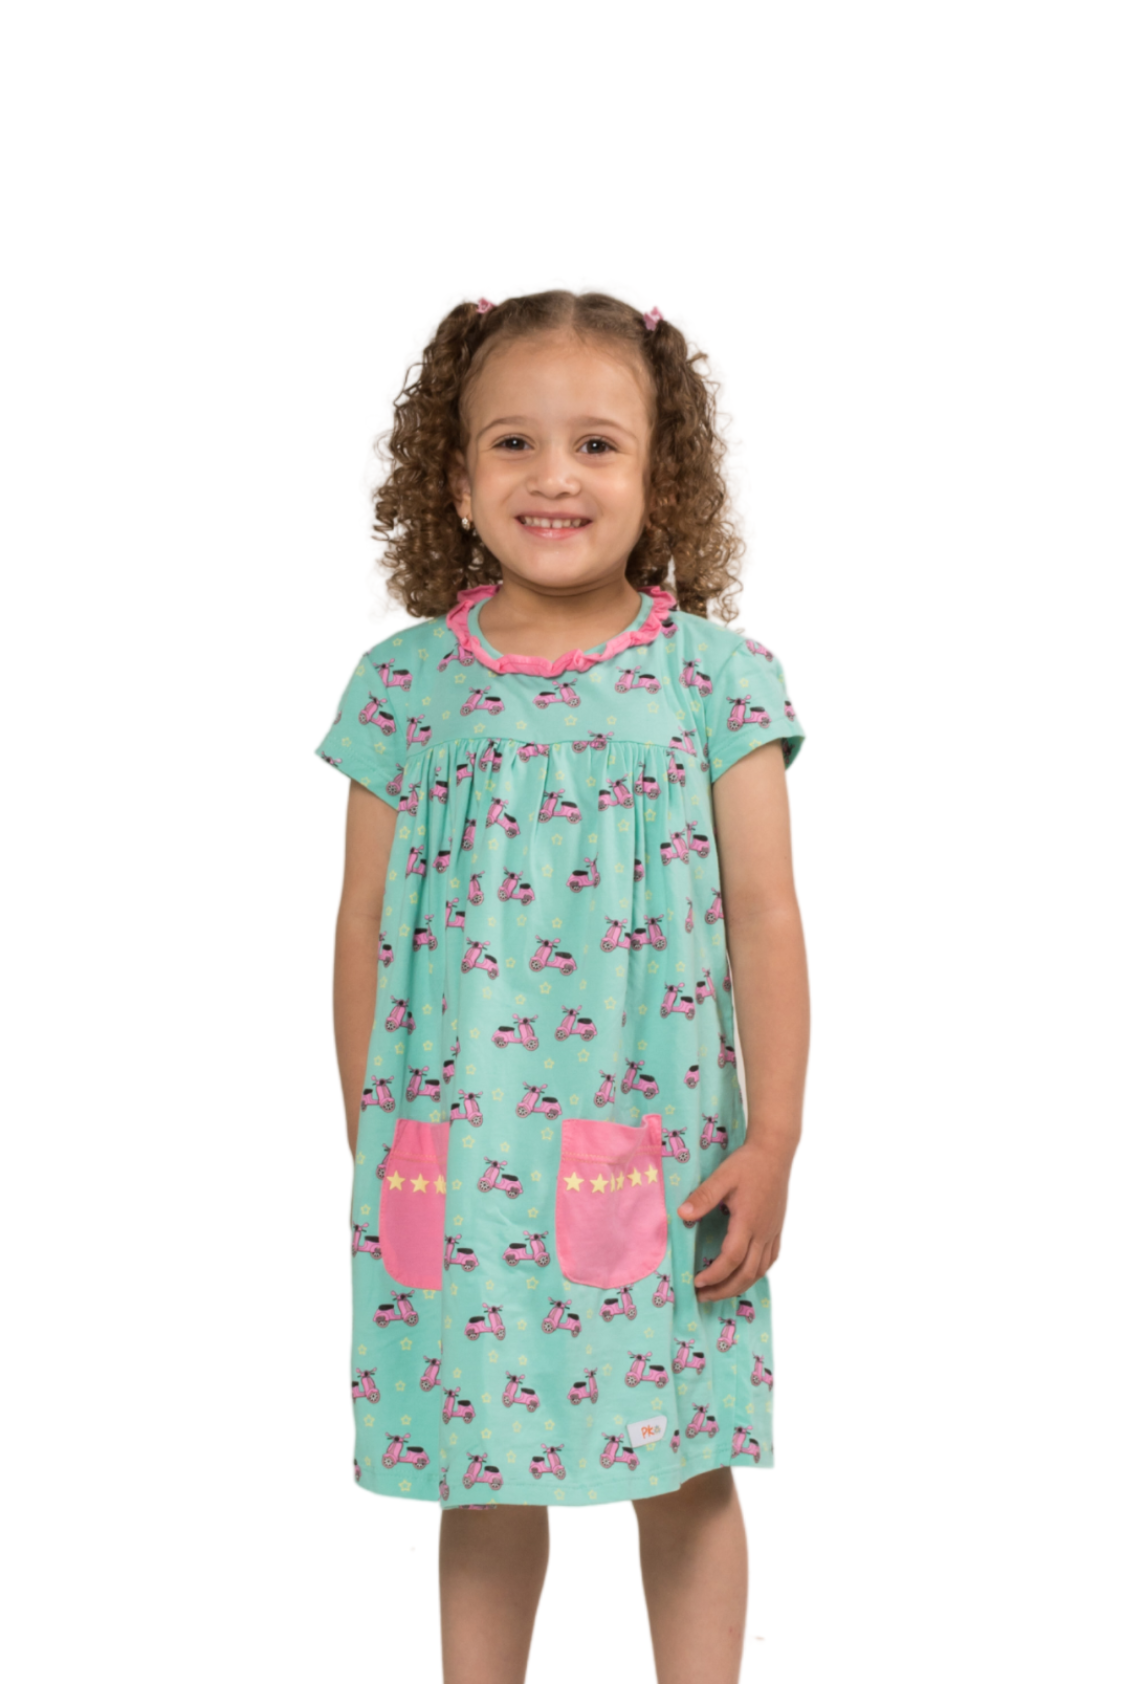 Girl dress with vespa and stars prints, made in Peruvian pima cotton, eco-friendly materials, empowering girls